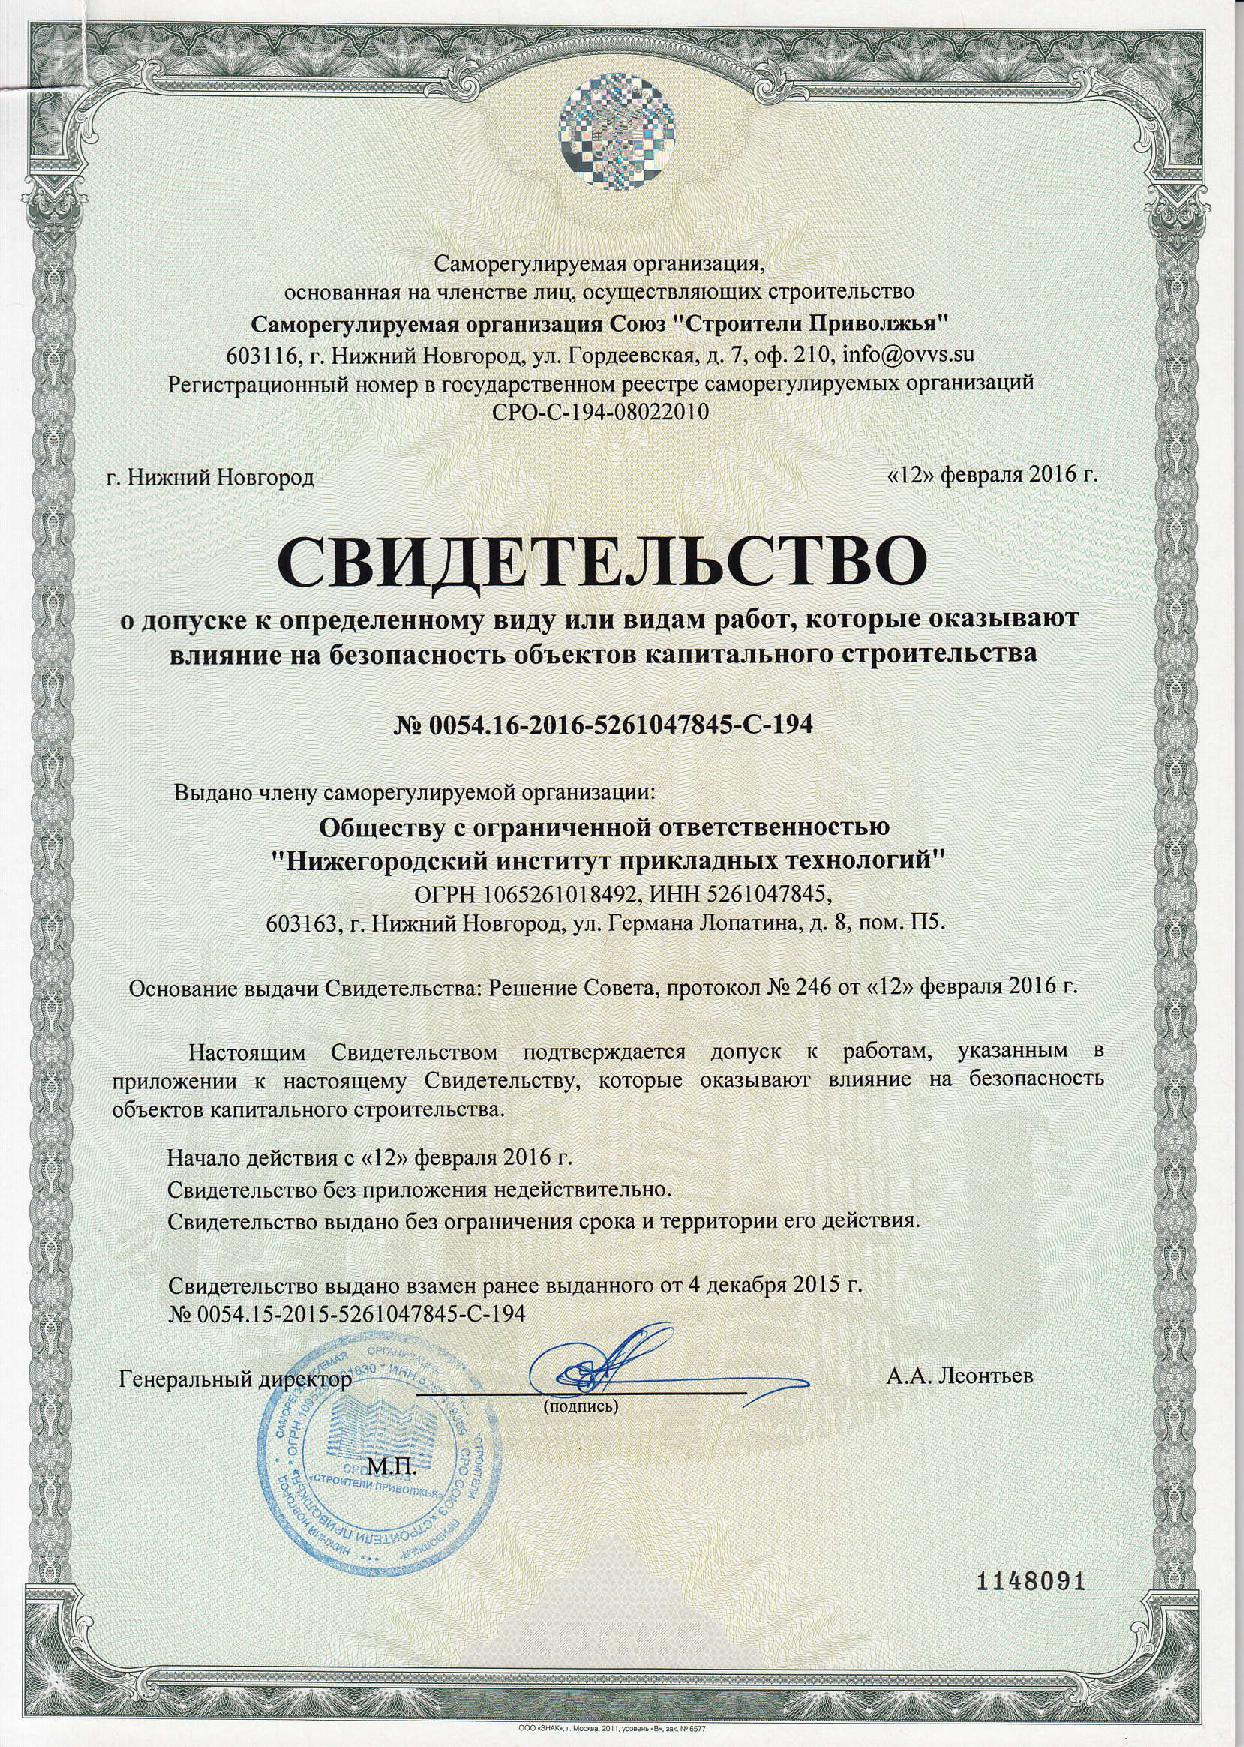 Self-regulating organization certificate of admission to a new type of activity